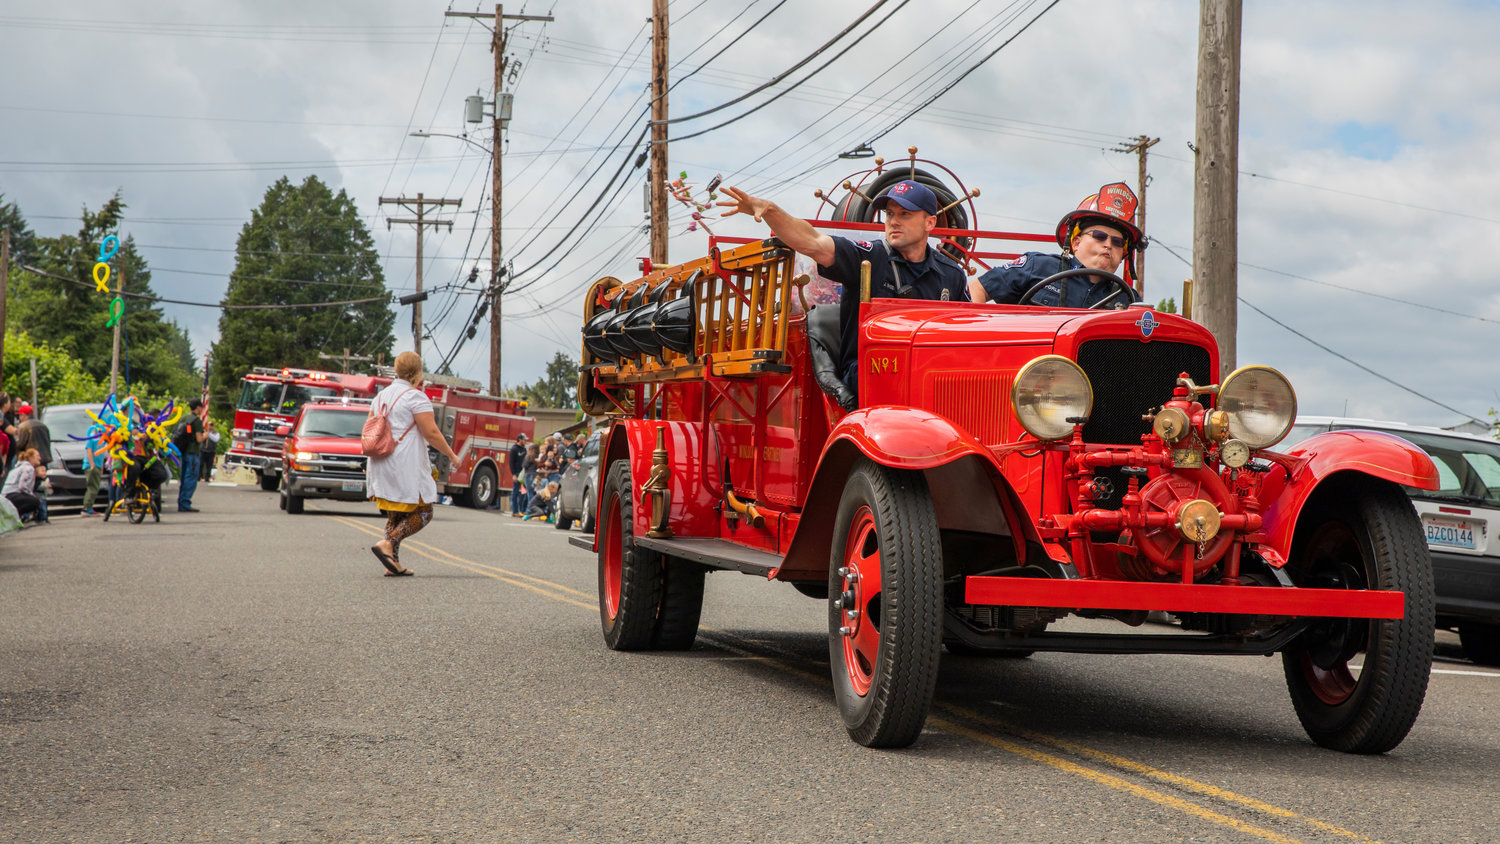 Candy is thrown from a vintage fire truck during the Egg Days Festival parade in Winlock on Saturday.